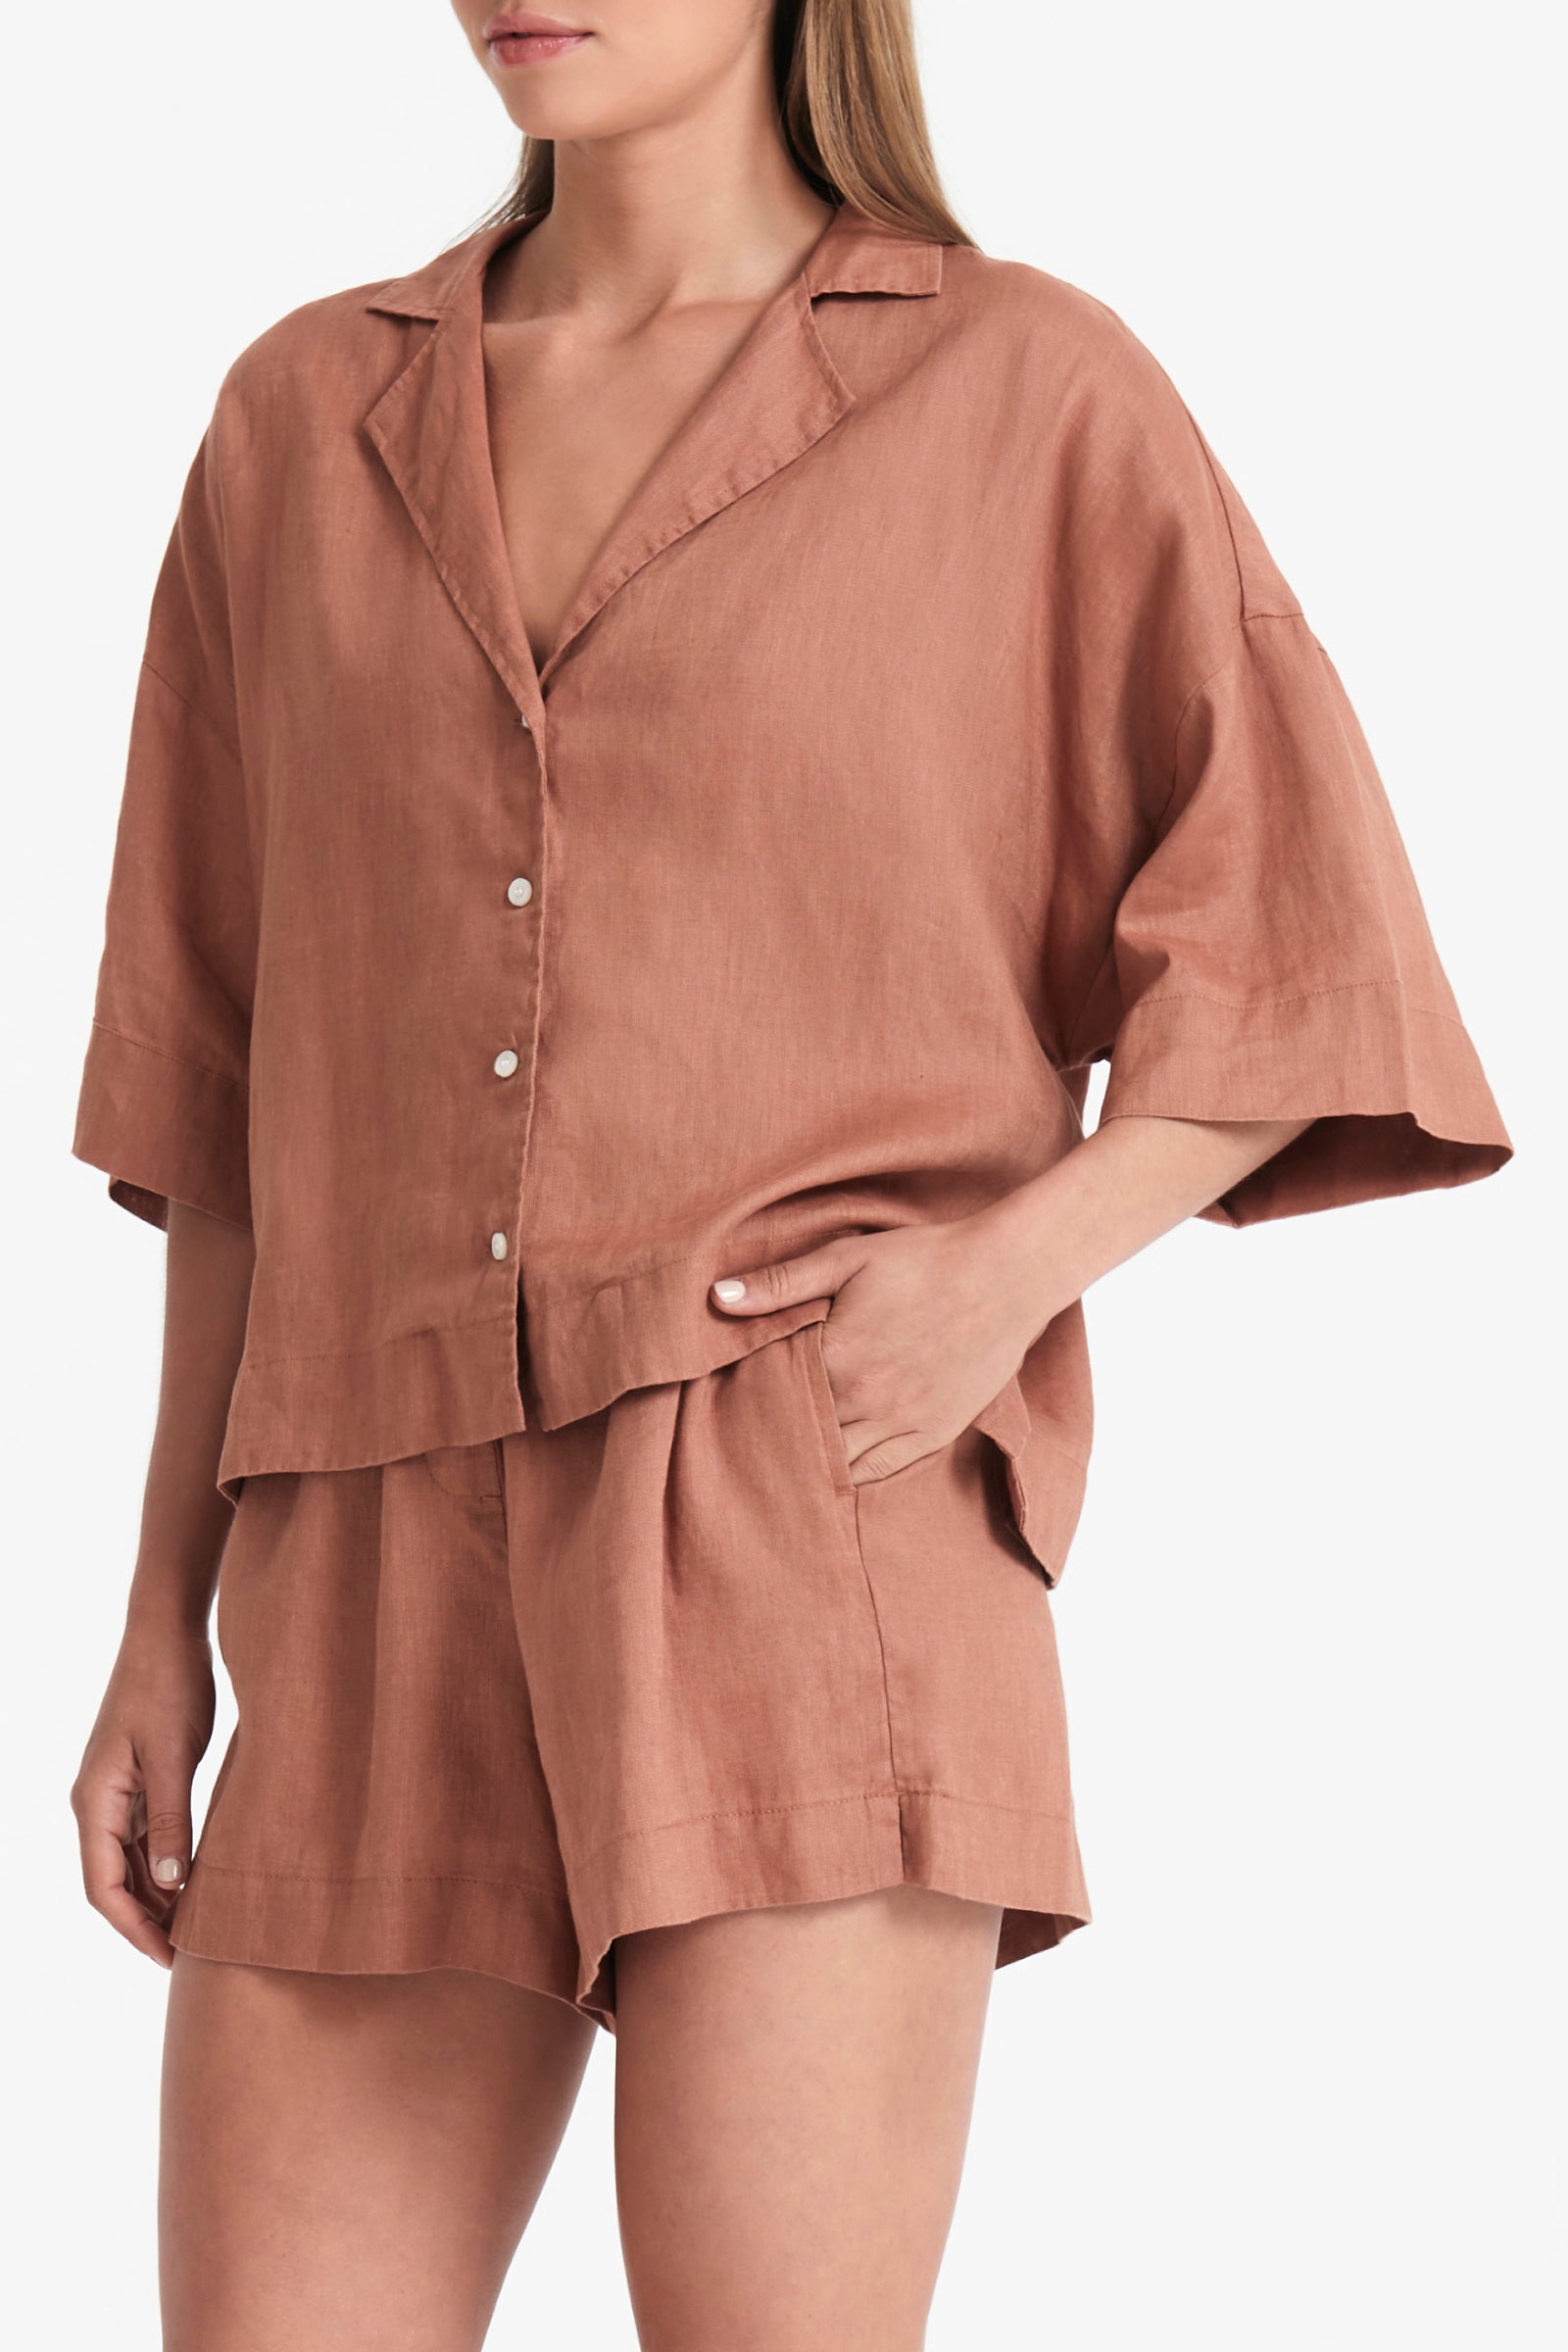 Nude Lucy Lounge Linen Shirt in Terracotta